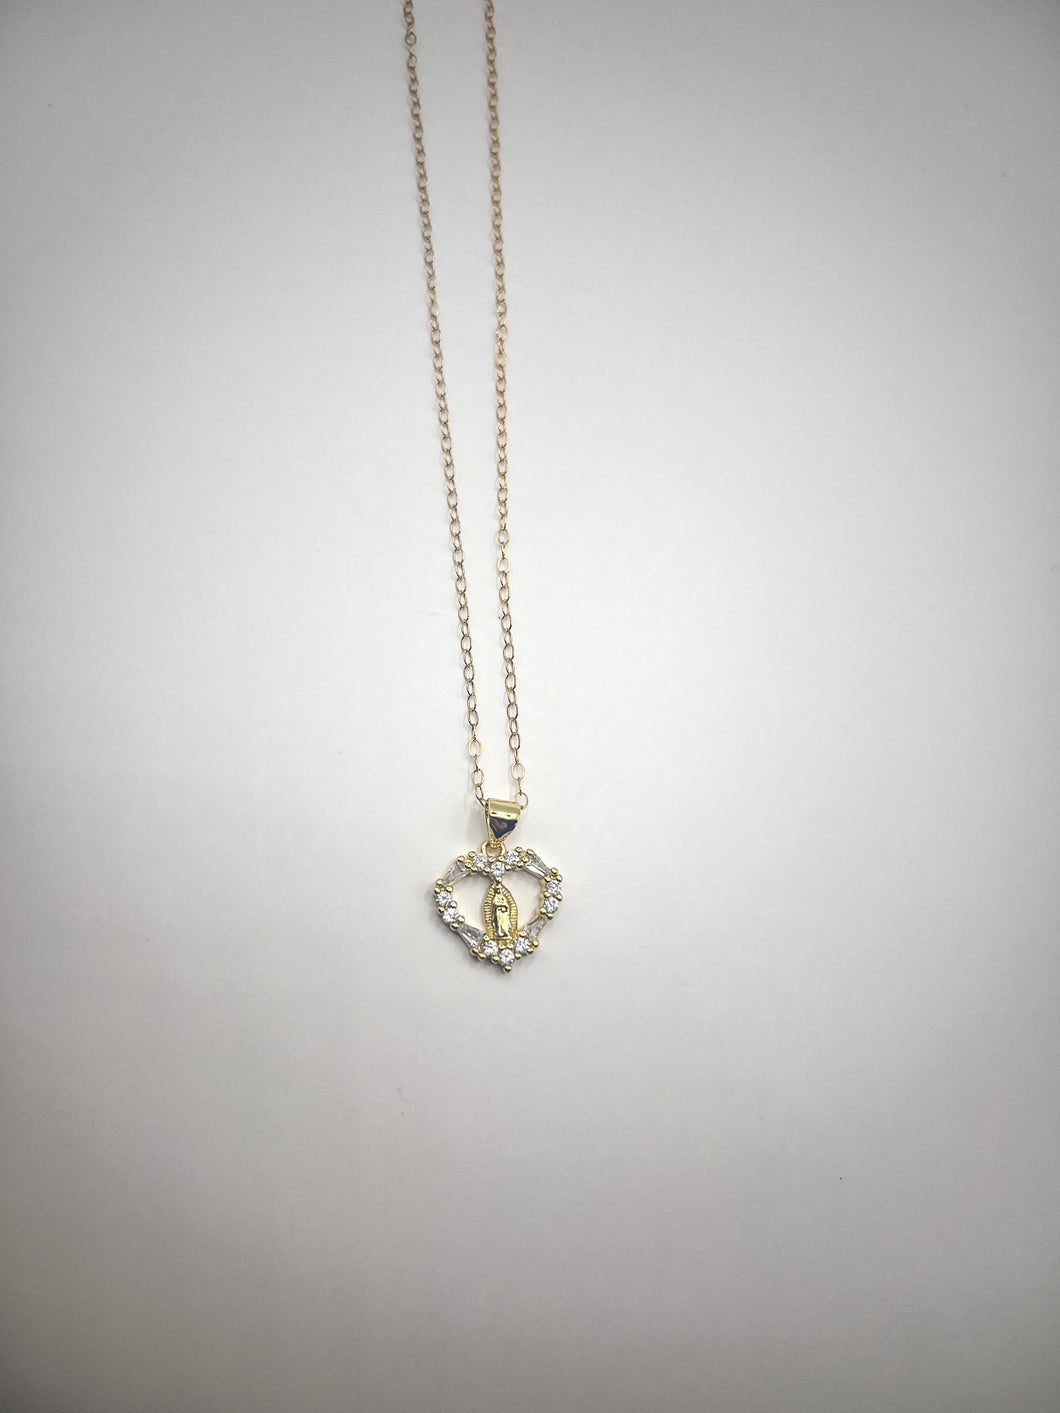 Heart Lady Guadalupe CZ Necklace - Gold Filled